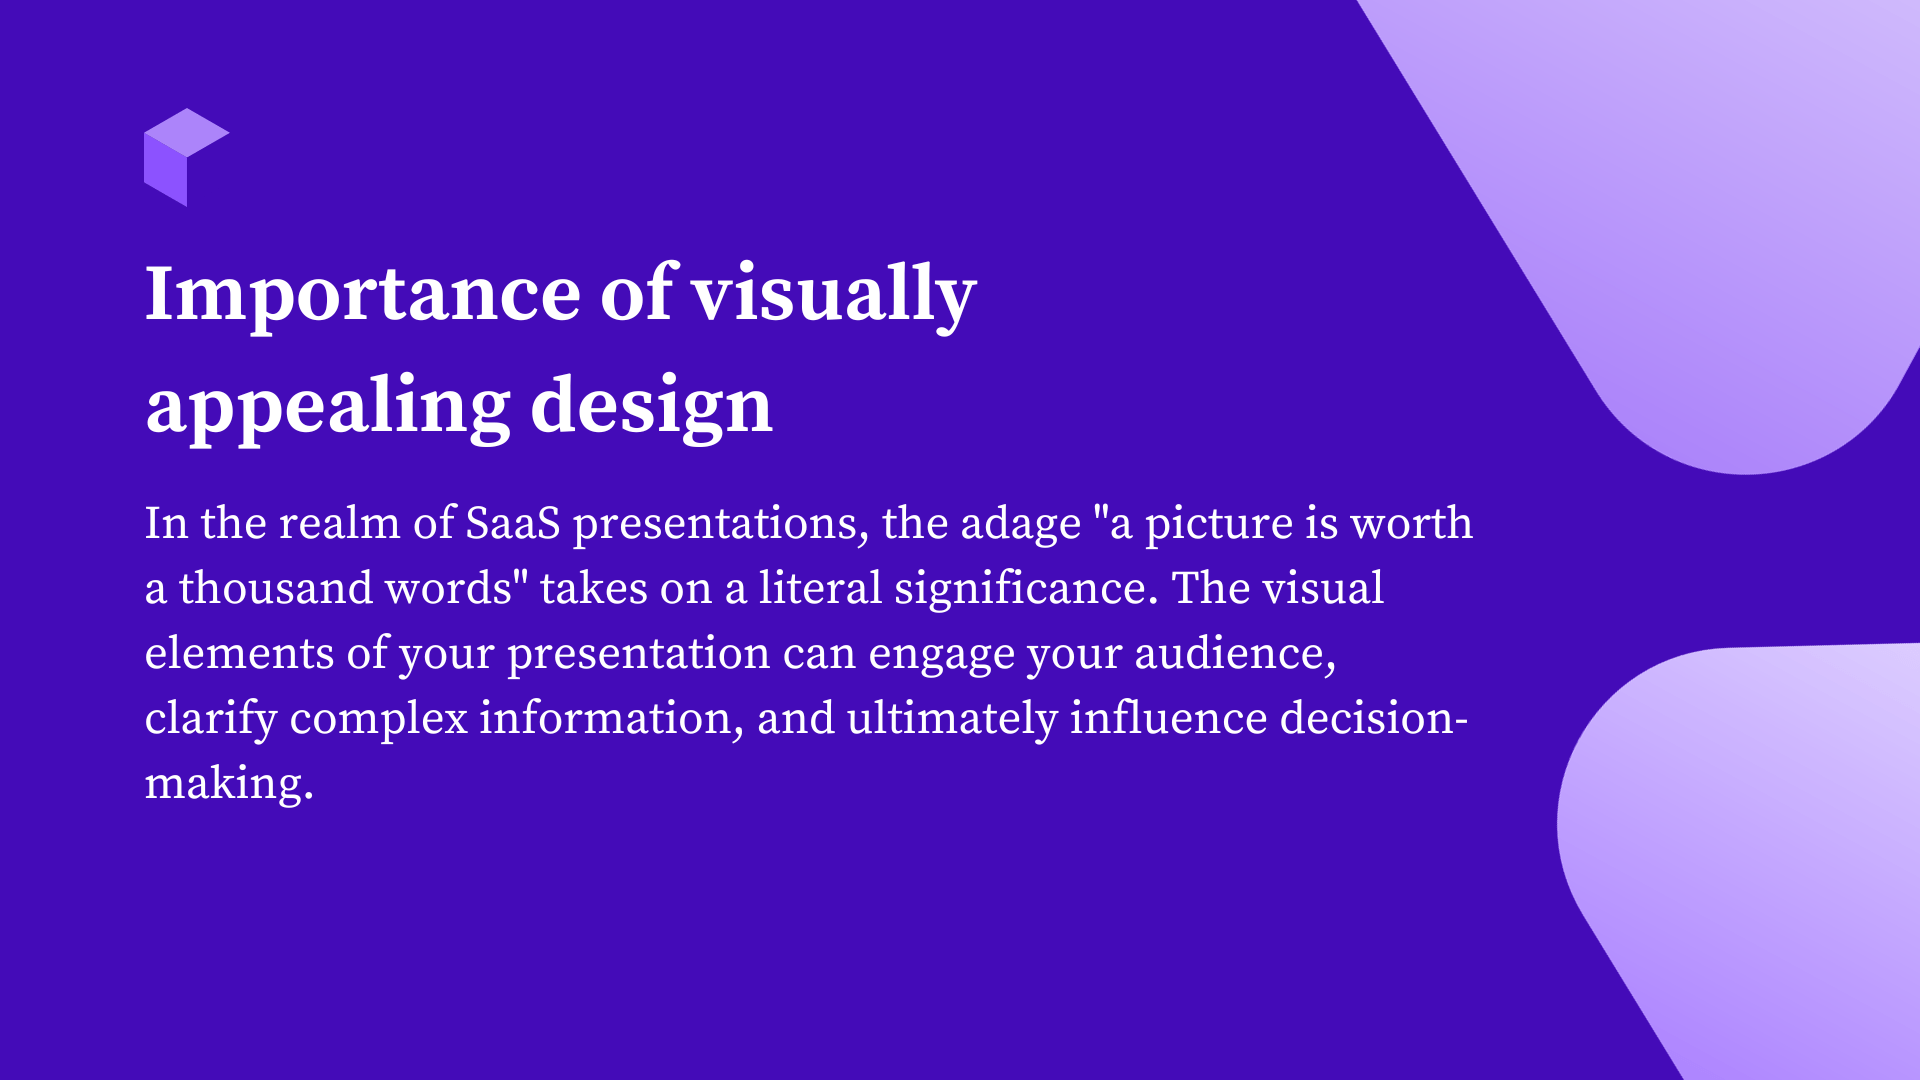 Importance of visually appealing design when creating a saas presentation